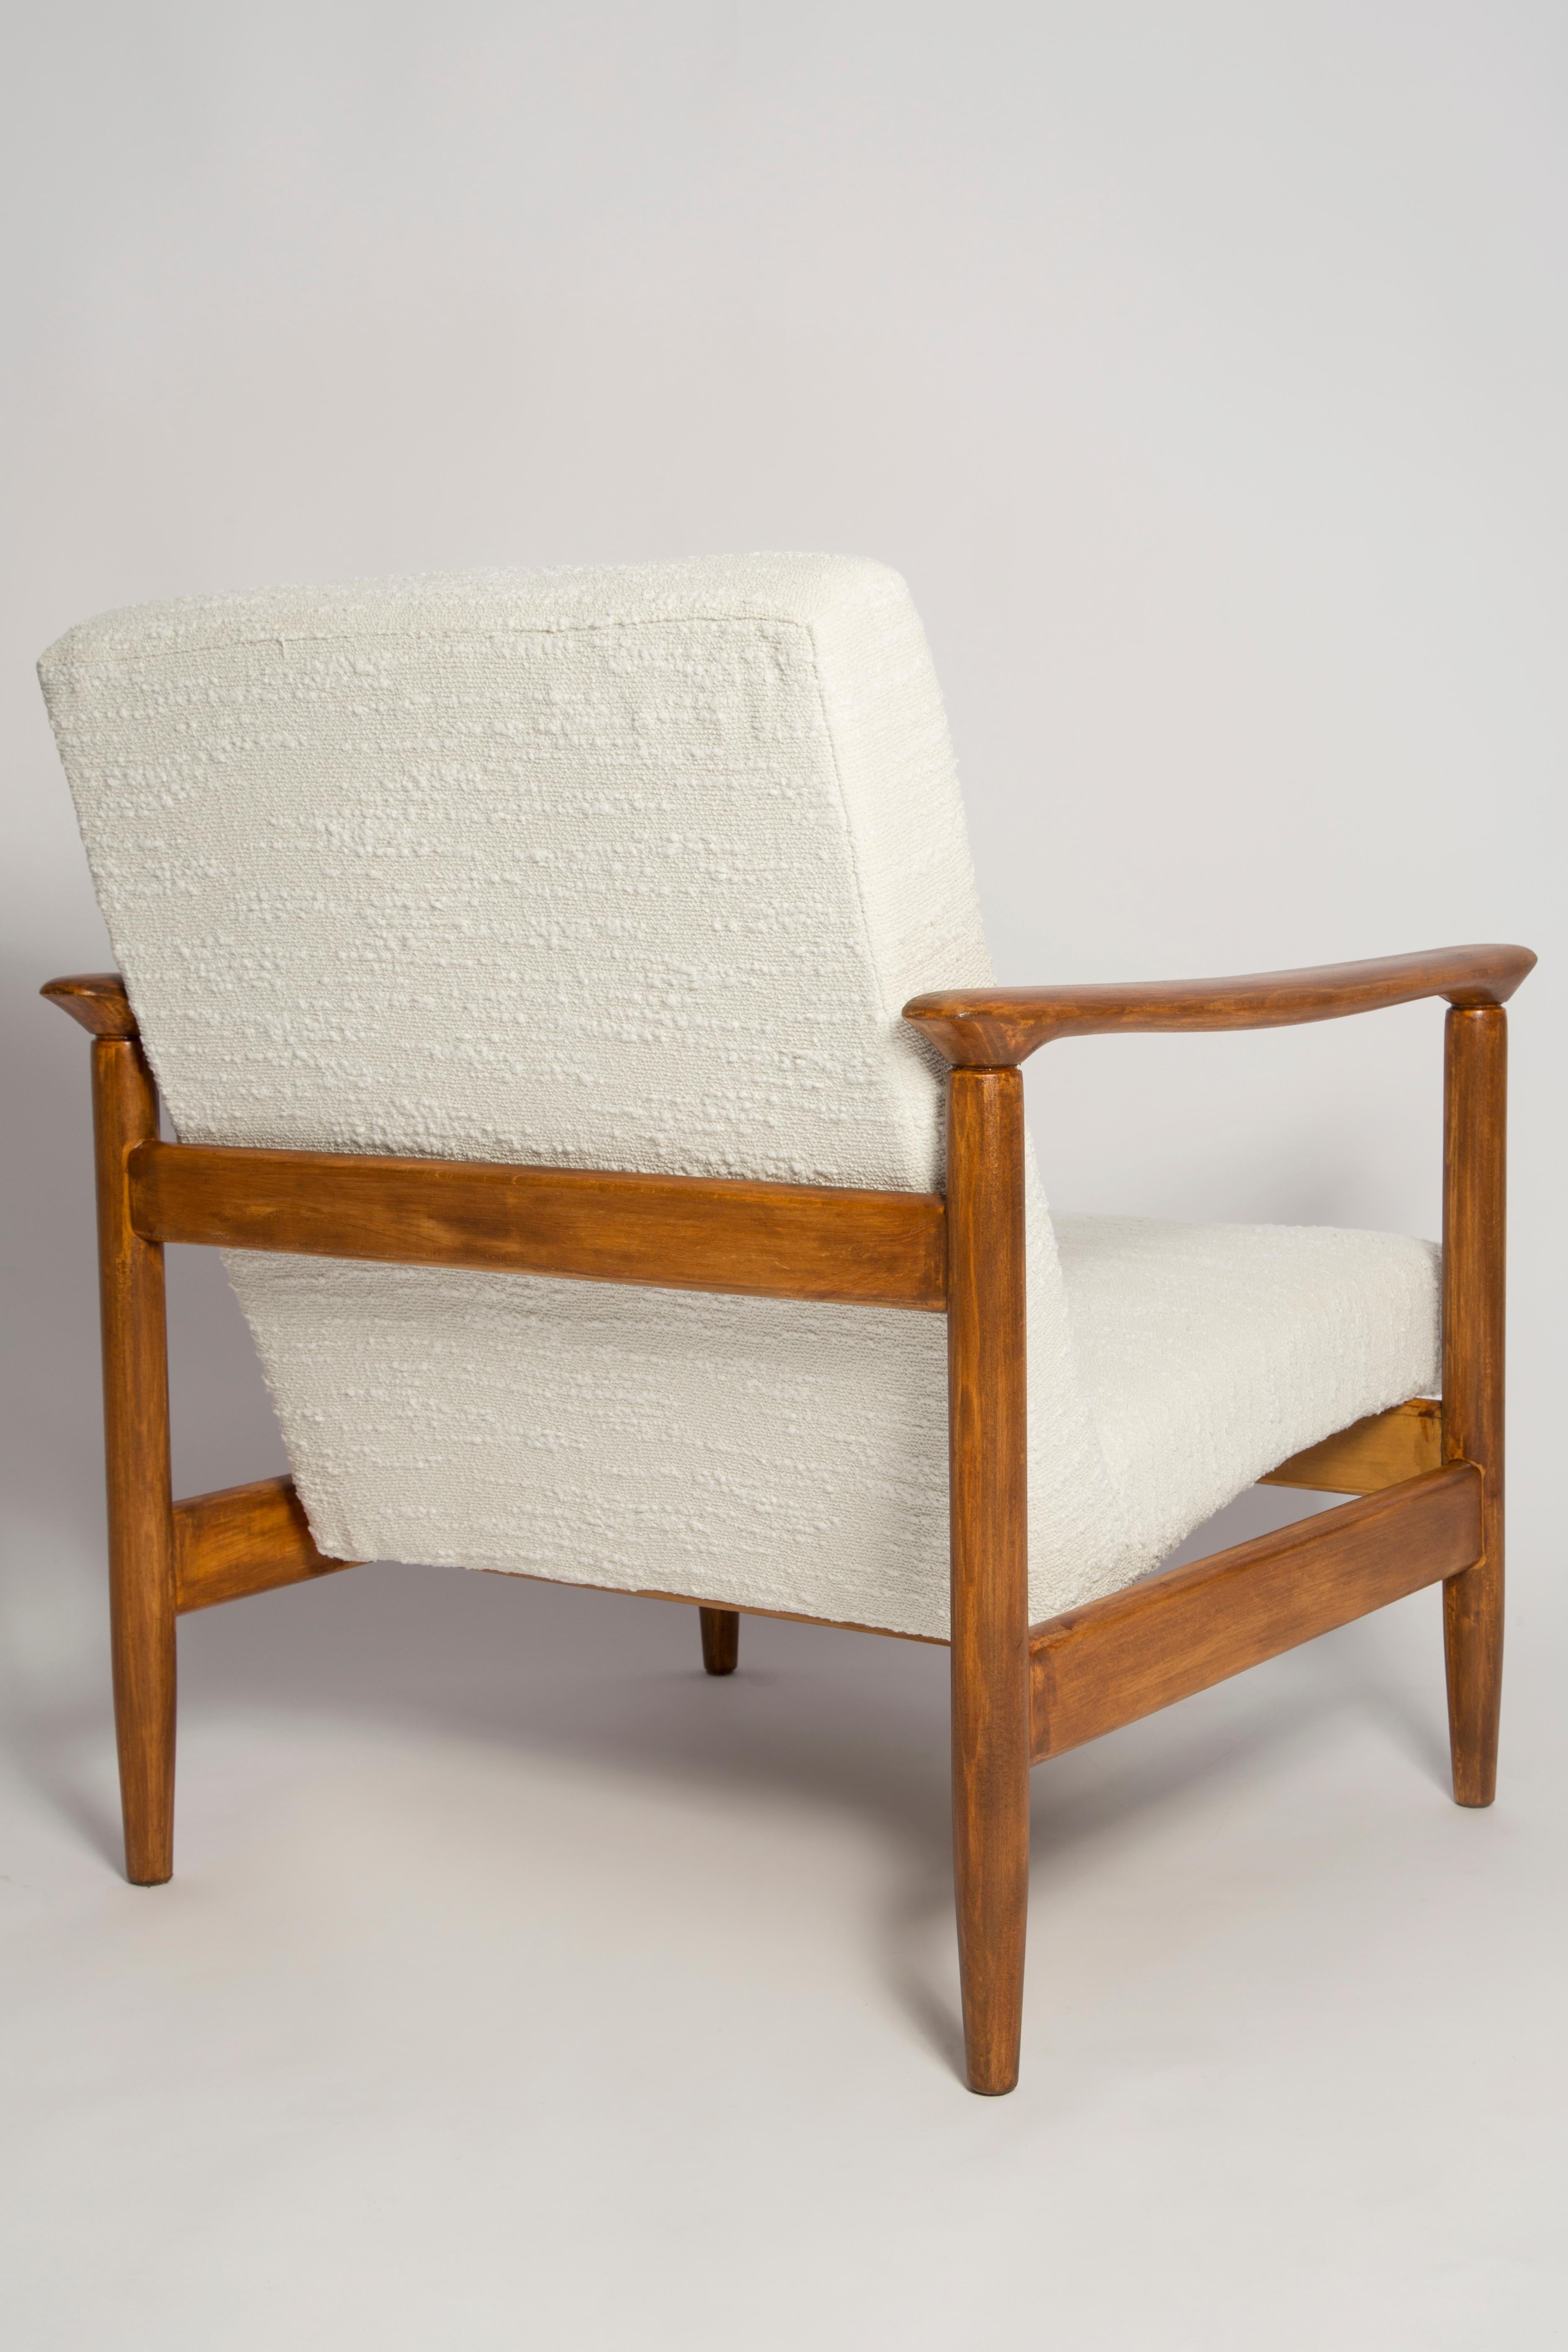 Pair of Mid Century White Boucle Armchairs, GFM 142, Edmund Homa, Europe, 1960s For Sale 3